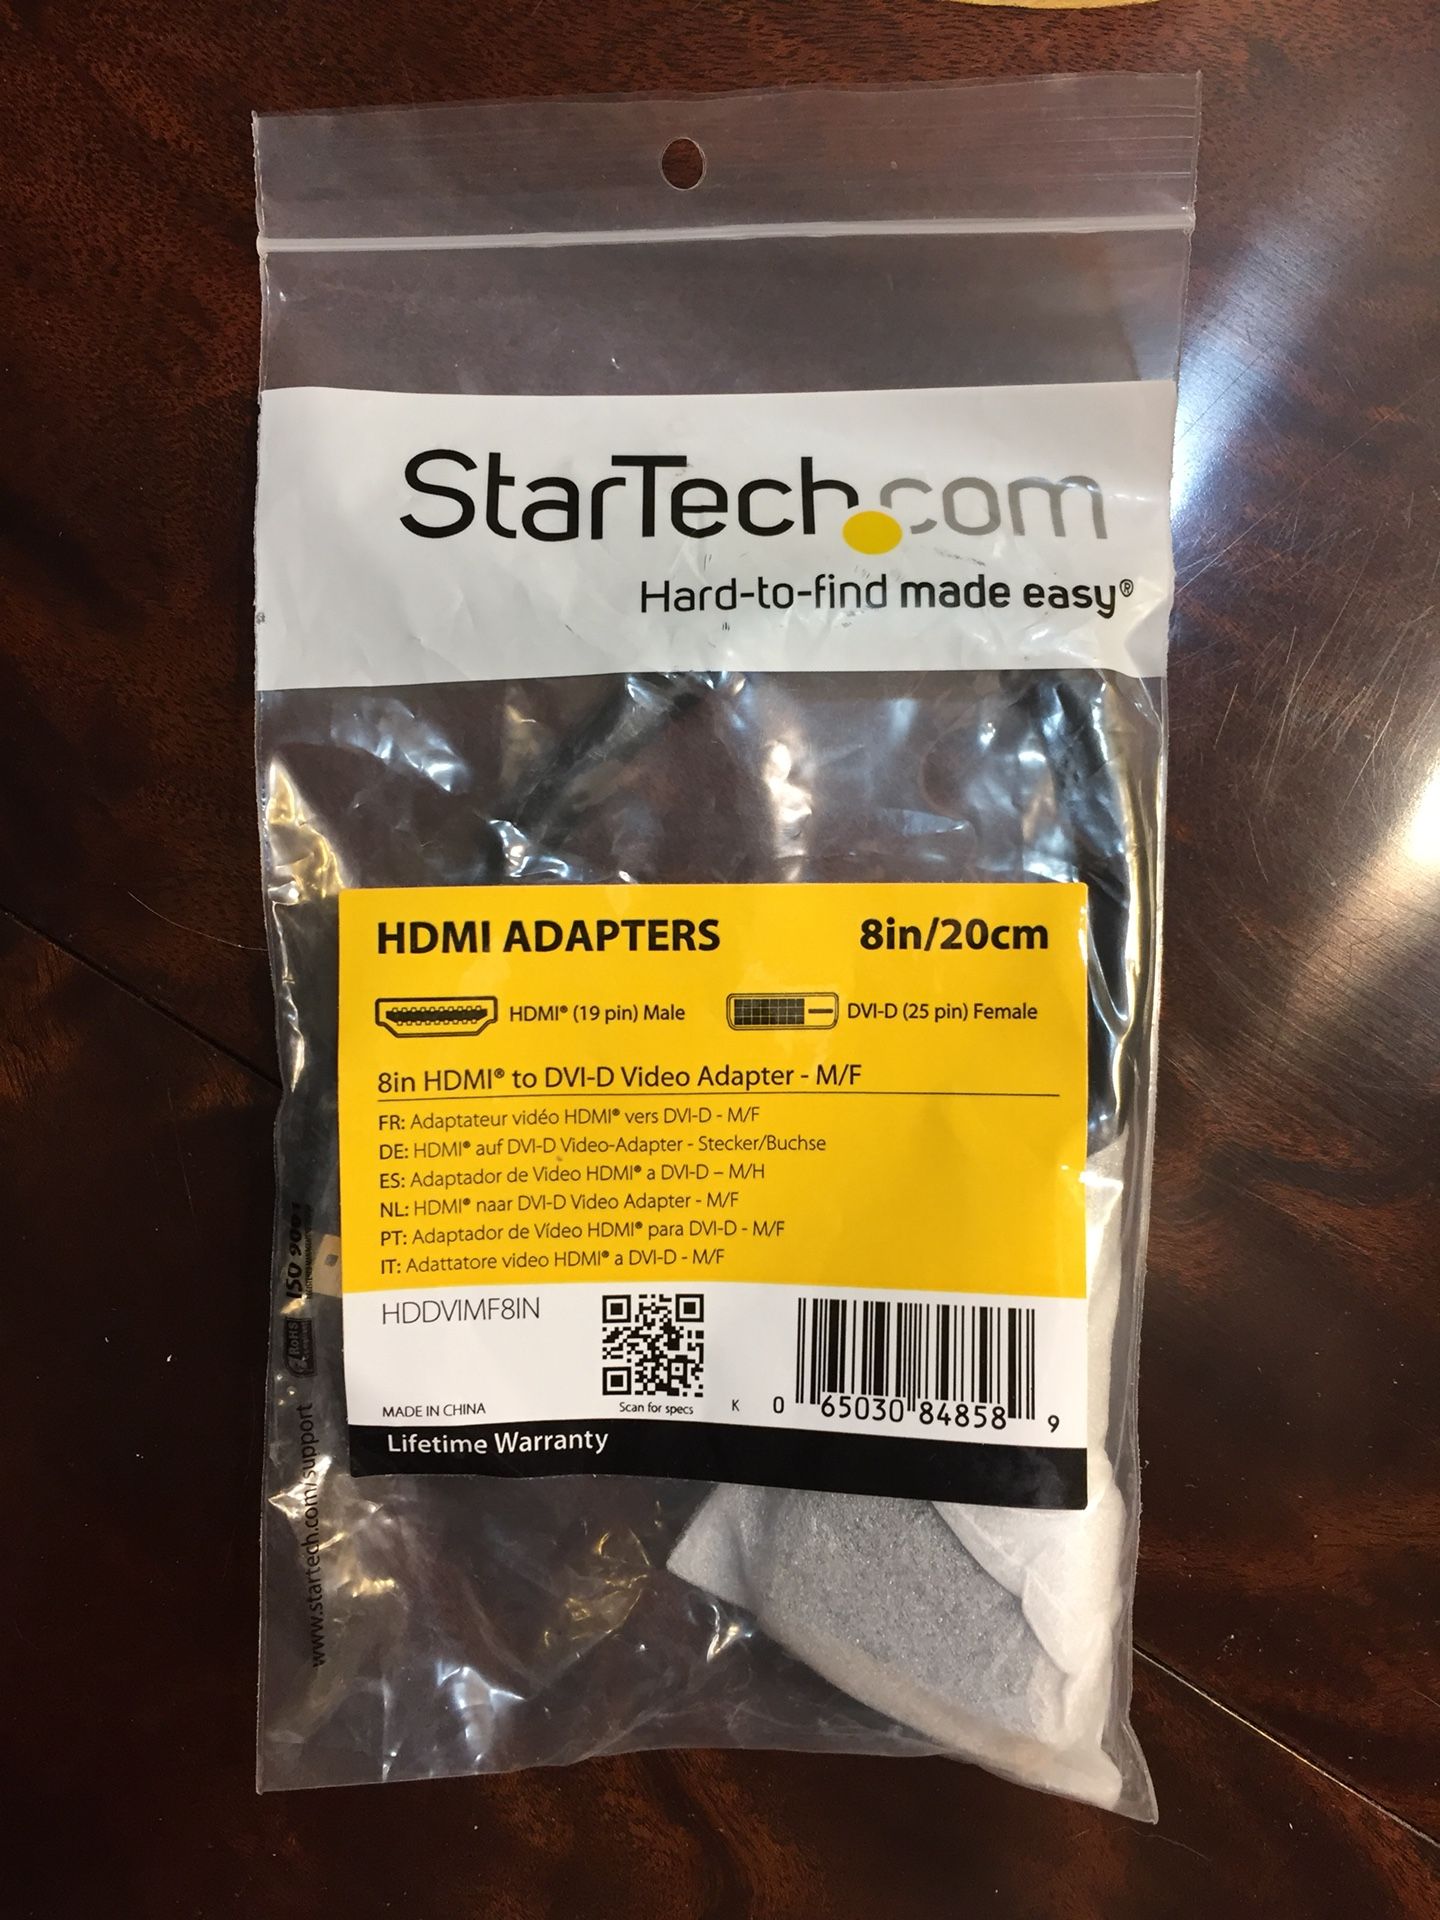 StarTech HDMI to DVI-D Video Adapter. Brand new. Still sealed in original packaging. HDMI (19 pin) Male. DVI-D (25 pin) Female.